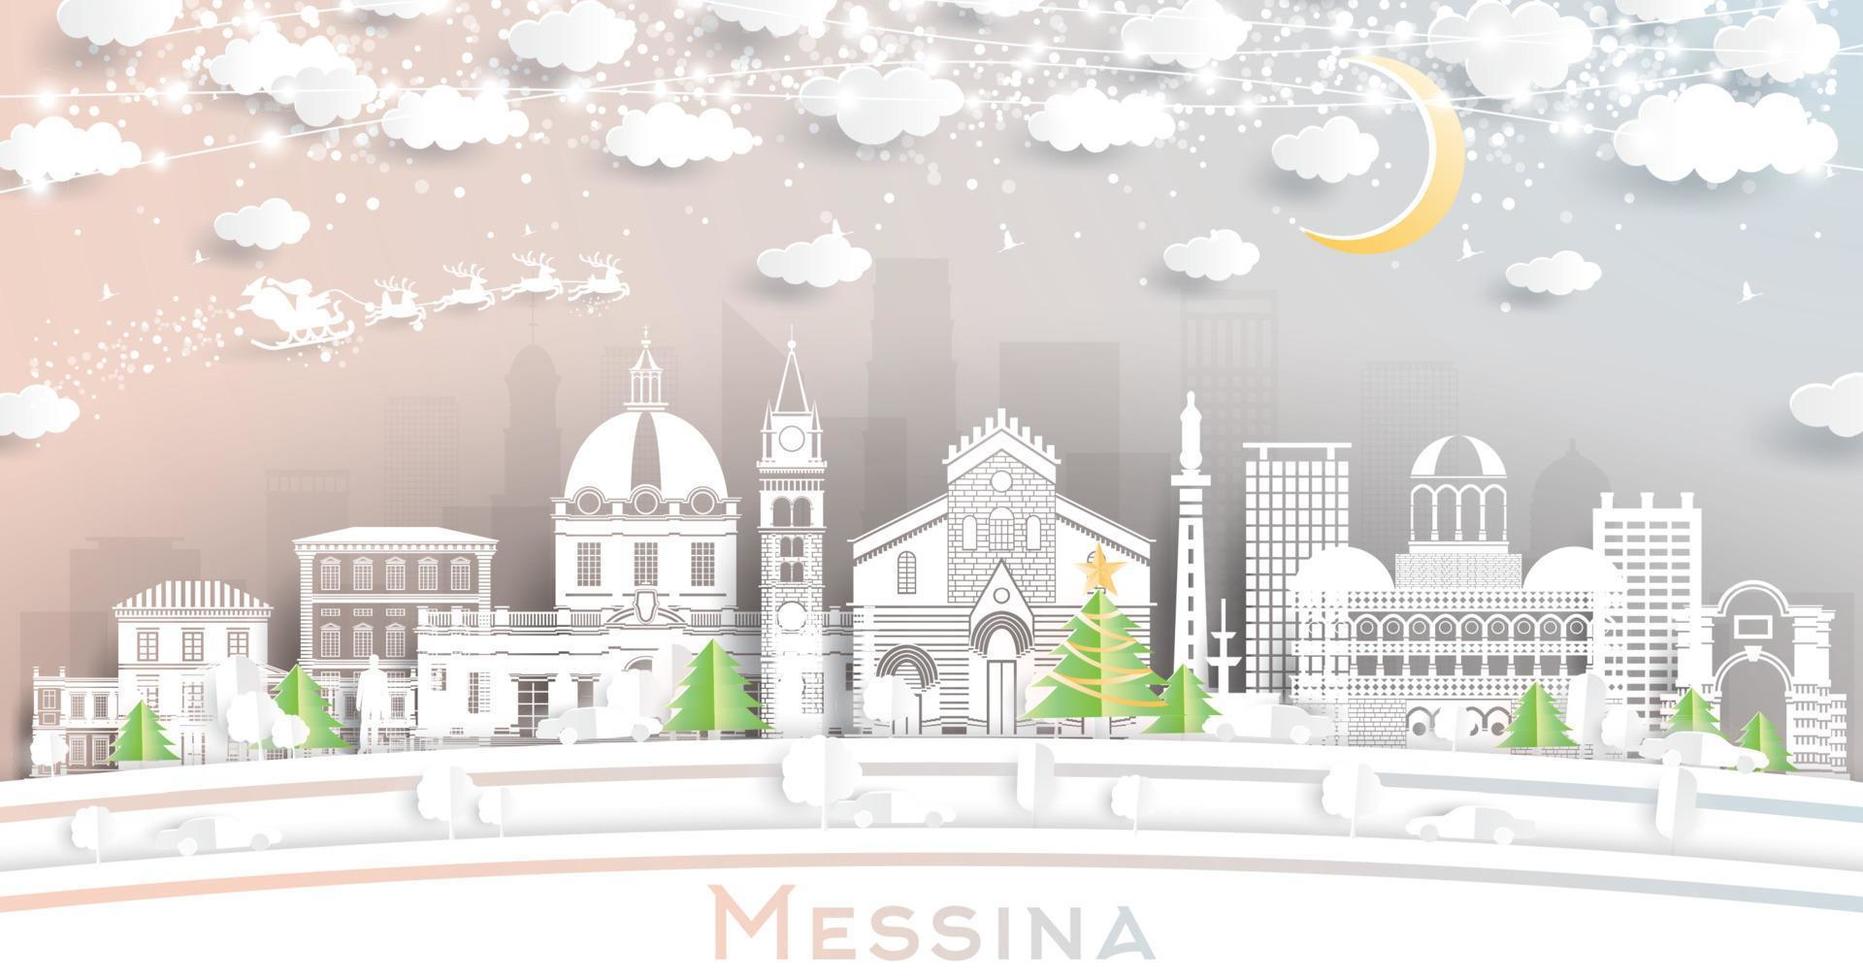 Messina Sicily Italy City Skyline in Paper Cut Style with Snowflakes, Moon and Neon Garland. vector